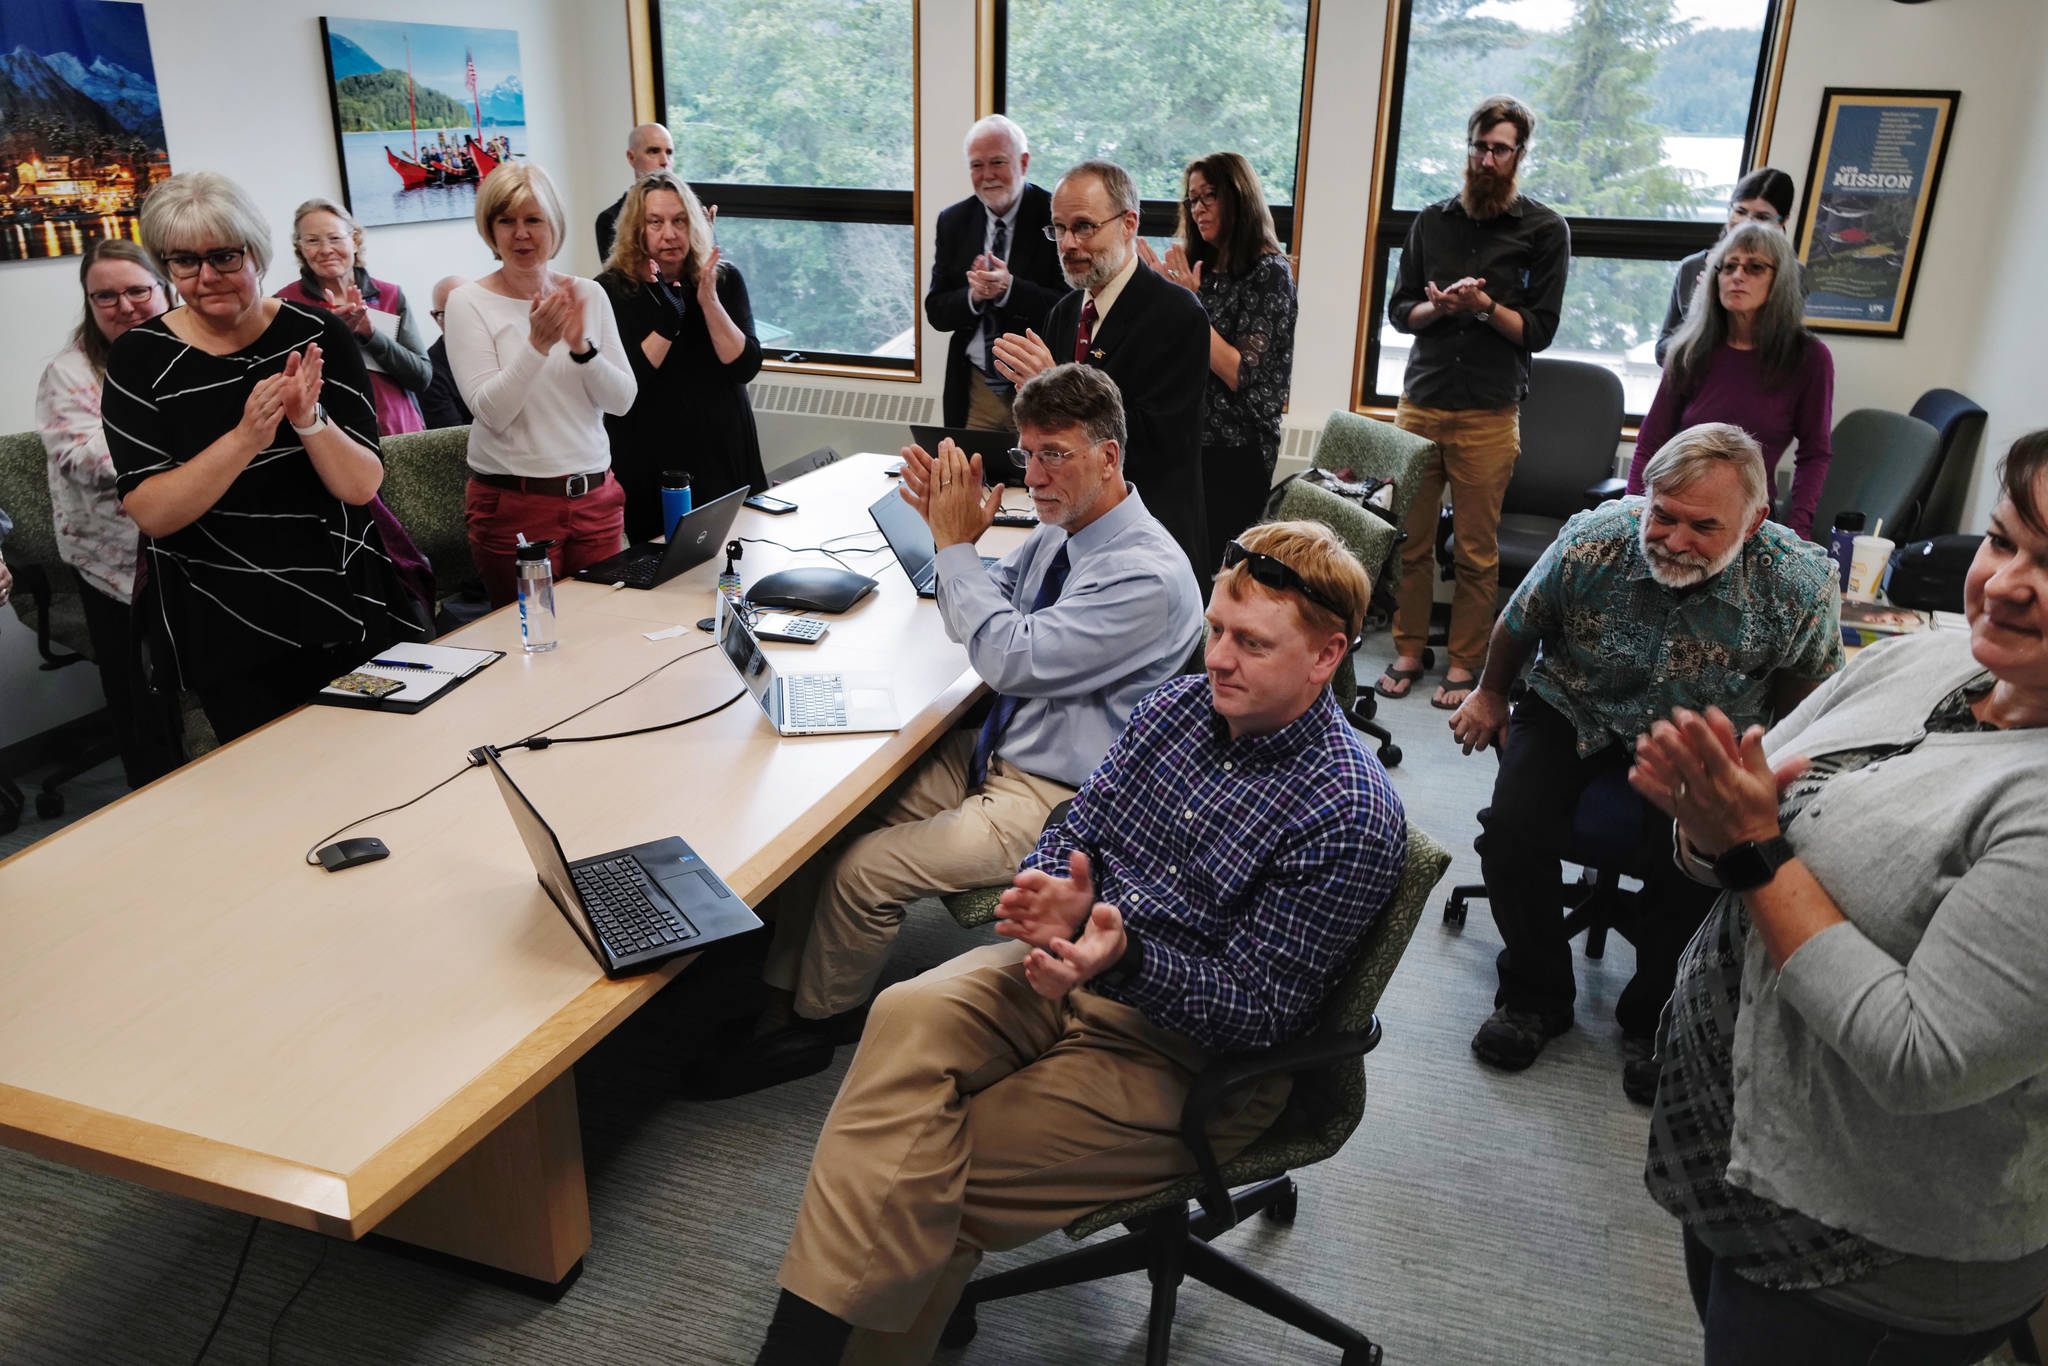 University of Alaska Southeast administrators and staff applaud a speech by Sen. Click Bishop, R-Fairbanks, as they watch an online meeting being held at UA campuses around the state on Gov. Mike Dunleavy’s budget cuts on Monday, July 15, 2019. (Michael Penn | Juneau Empire)